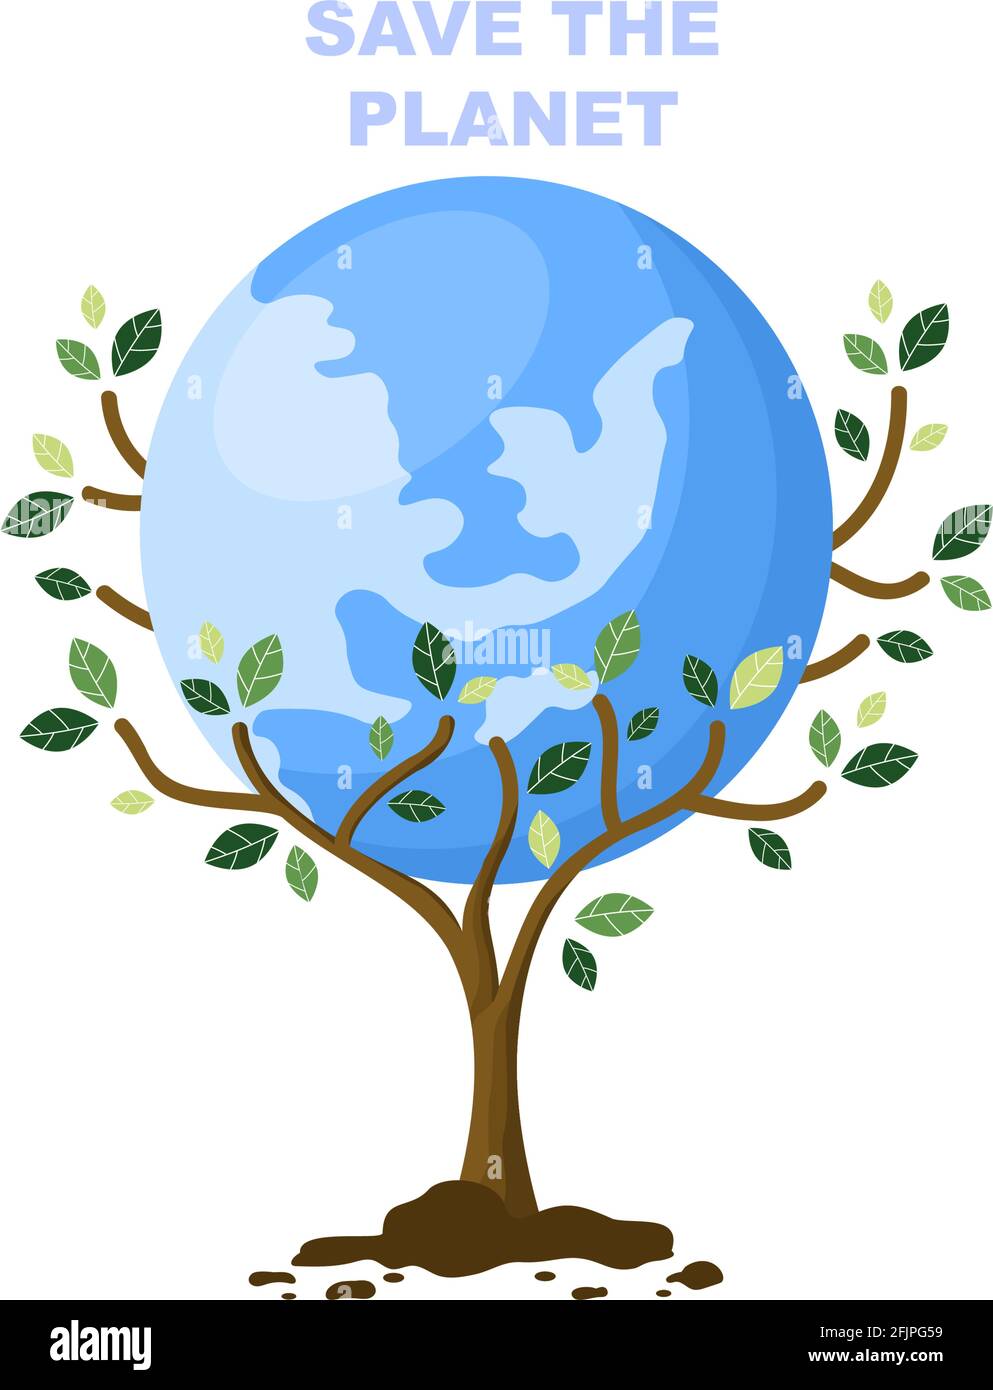 Save Our Planet Earth Illustration To Green Environment With Eco ...